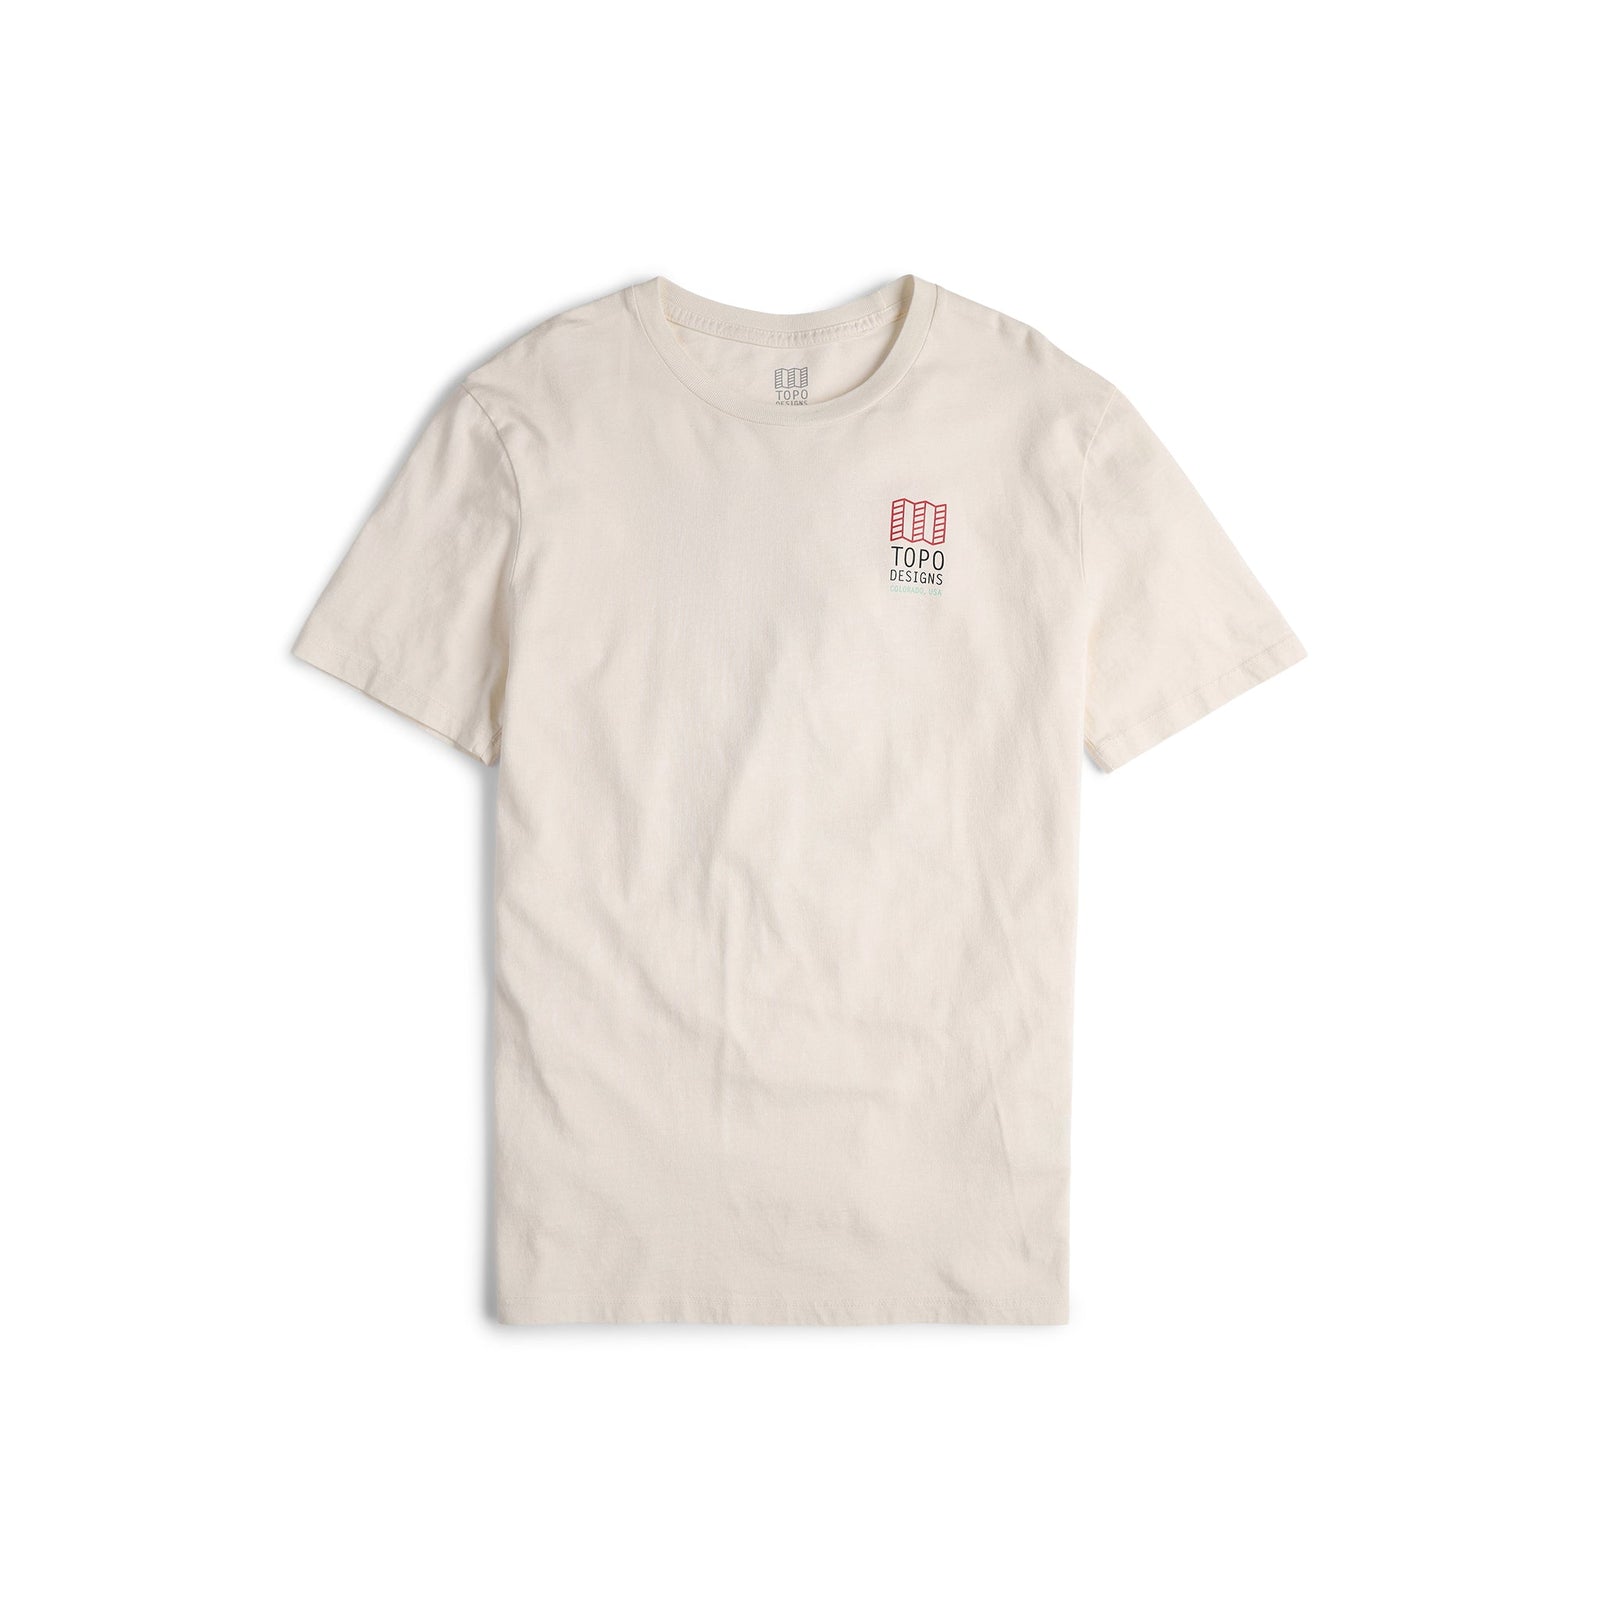 Front View of Topo Designs Men's Small Original Logo Tee 100% organic cotton short sleeve graphic logo t-shirt in "natural" white.